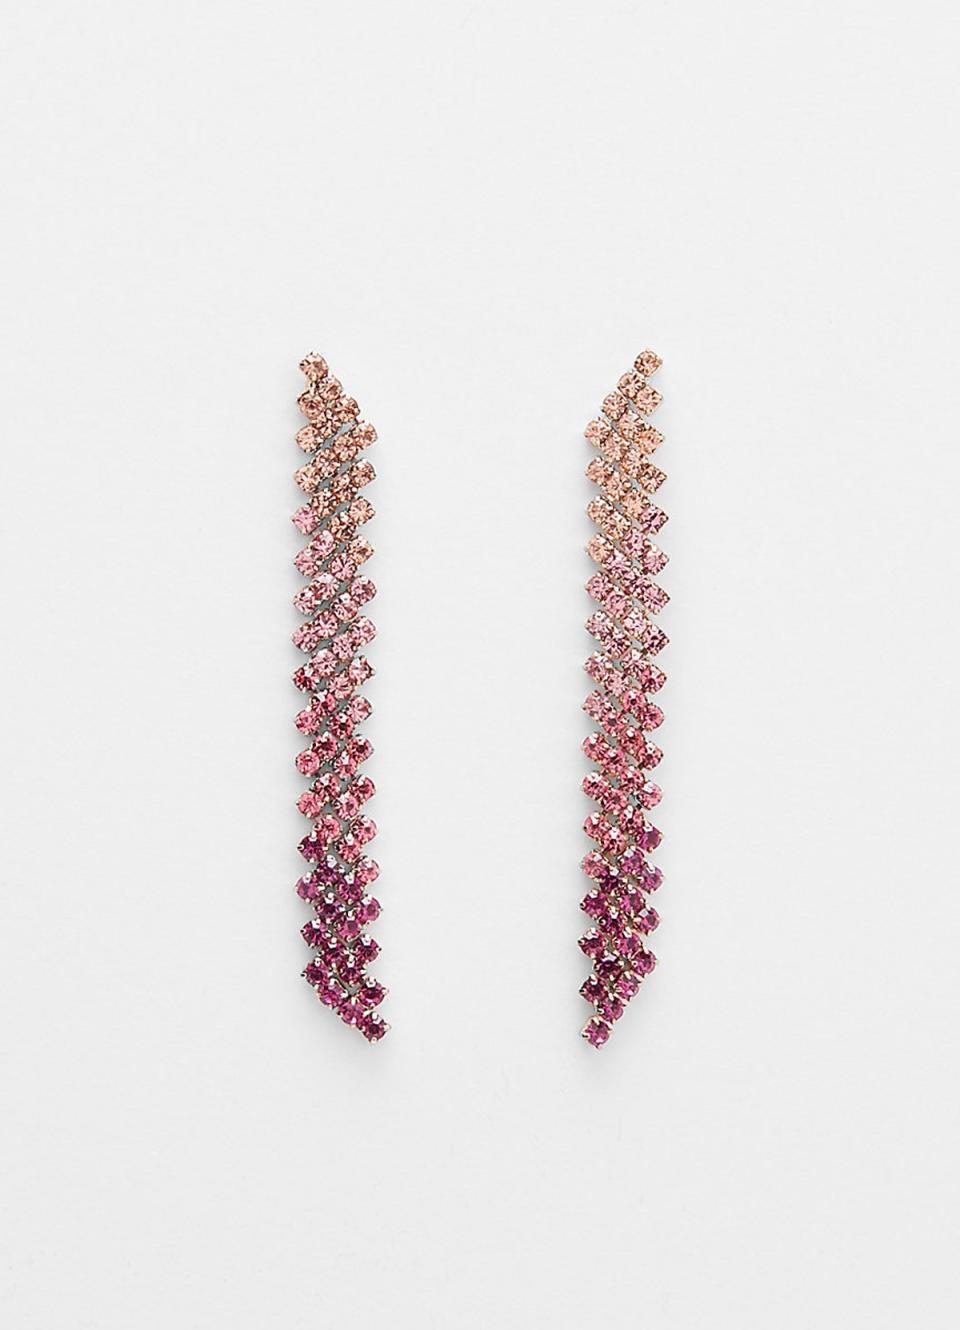 Express Linear Ombre Stone Post Back Earrings, $19.90, Express